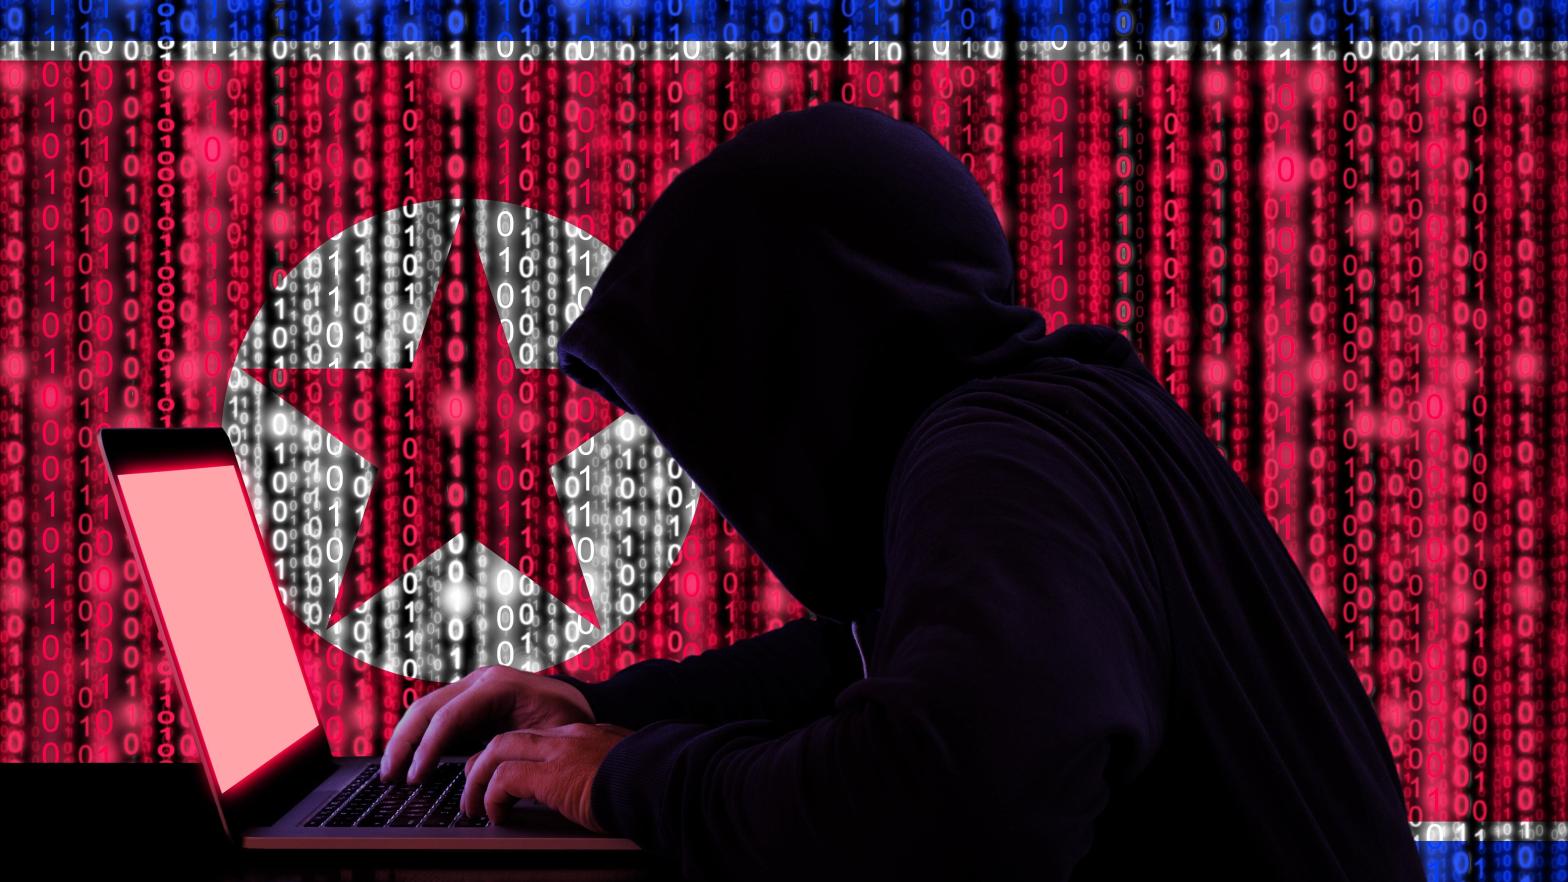 Missing some crypto? There's a good chance it was North Korea who took it. (Illustration: BeeBright, Shutterstock)